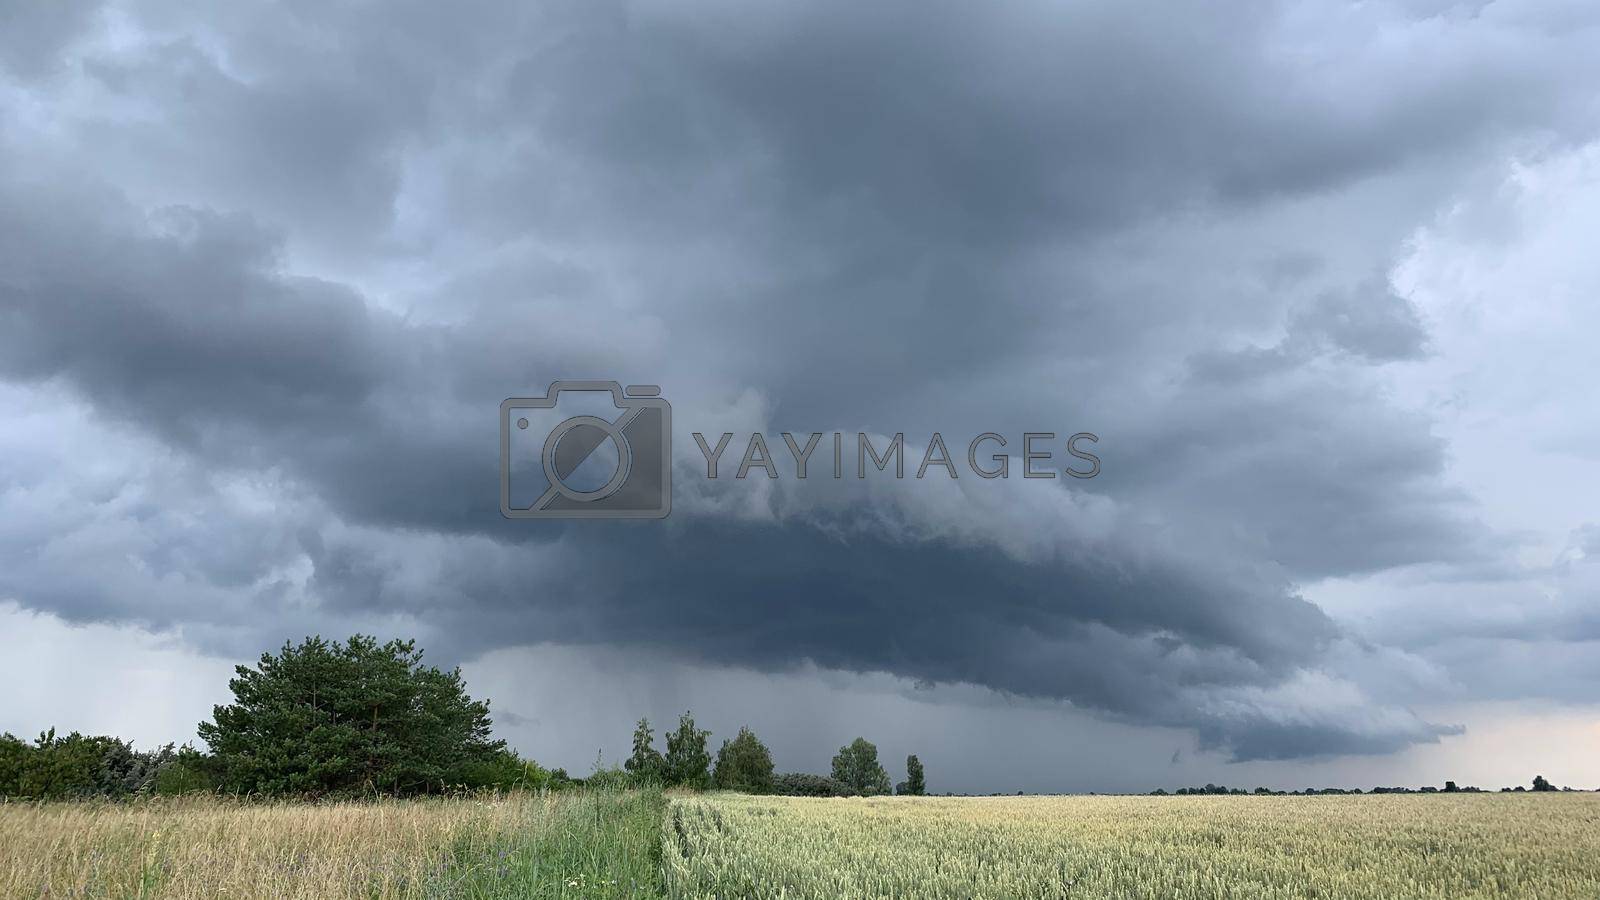 Royalty free image of Wheat fields with spikelets close-up by Olena_Mykhailenko